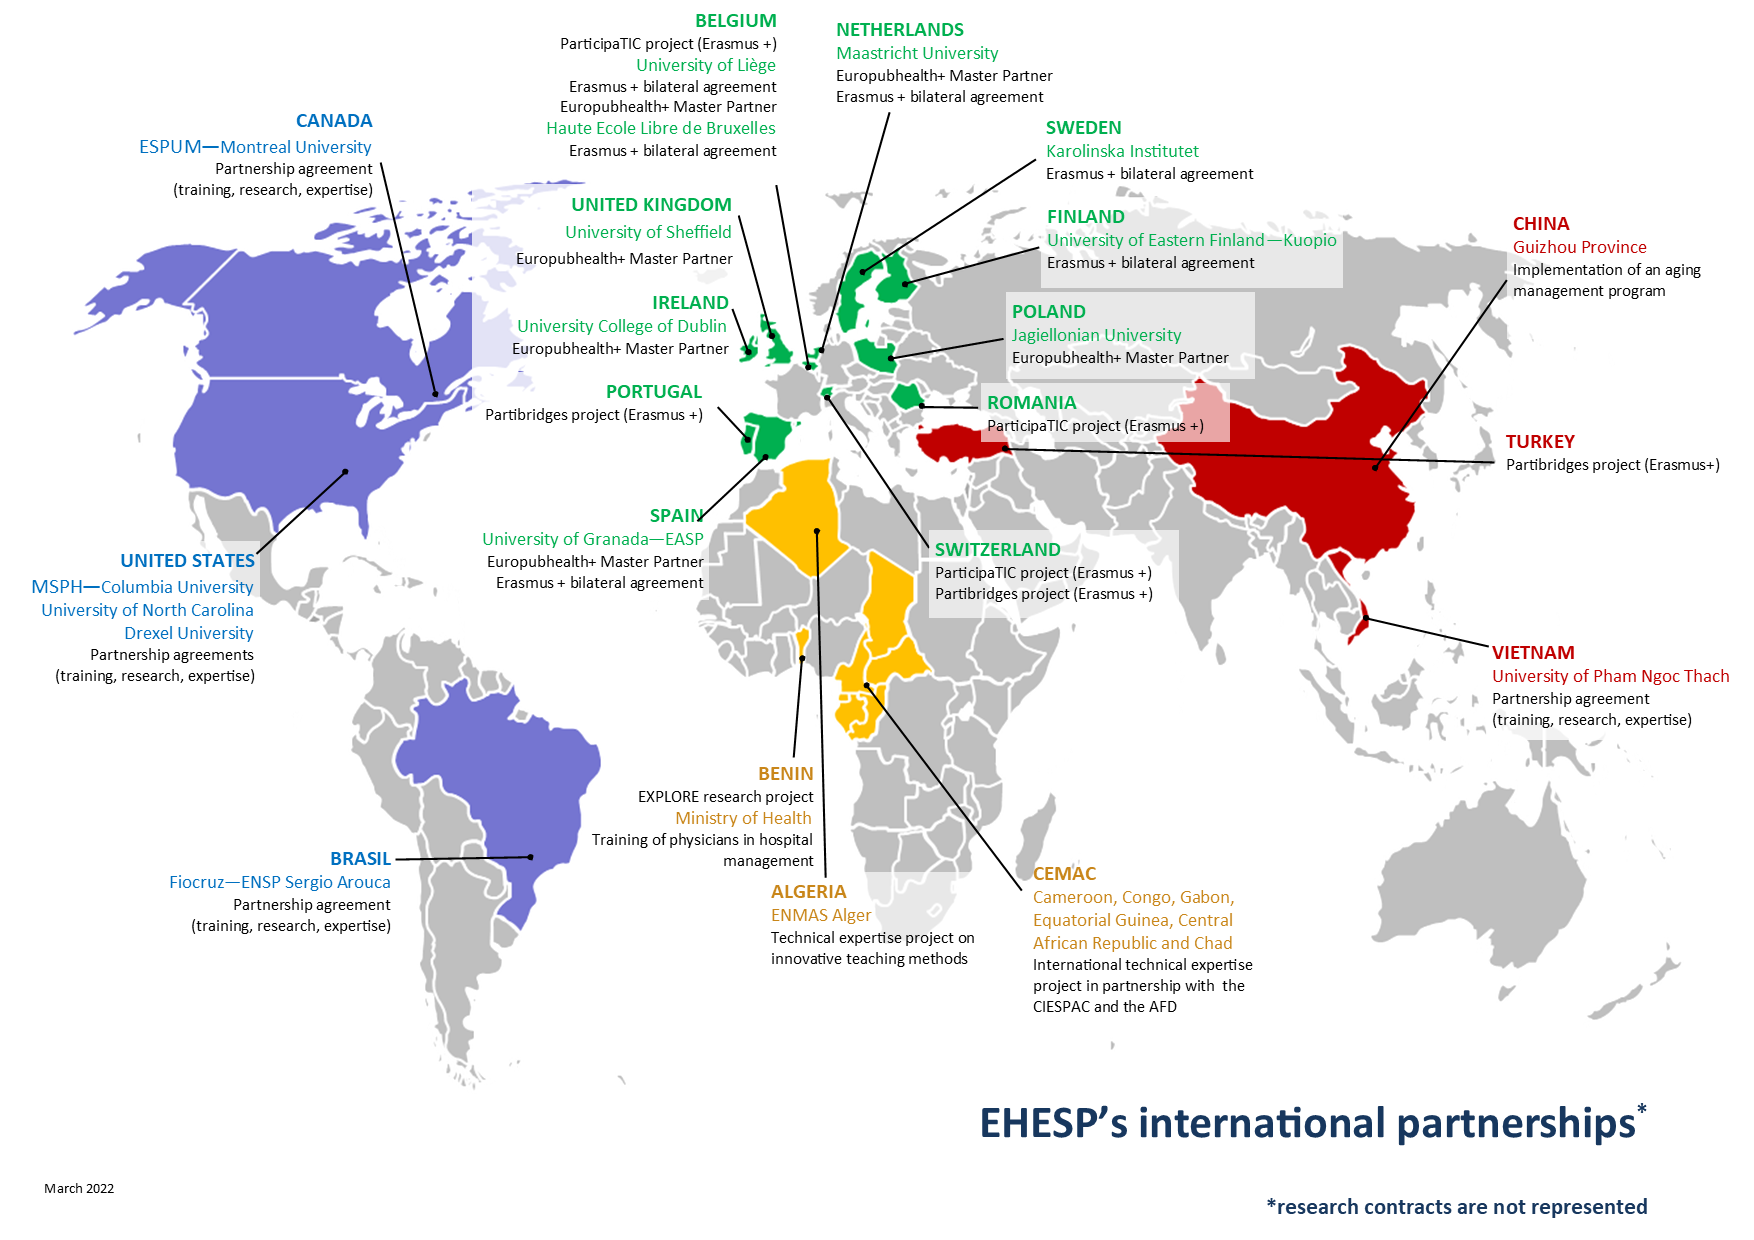 This is a map of EHESP's partnerships around the world.